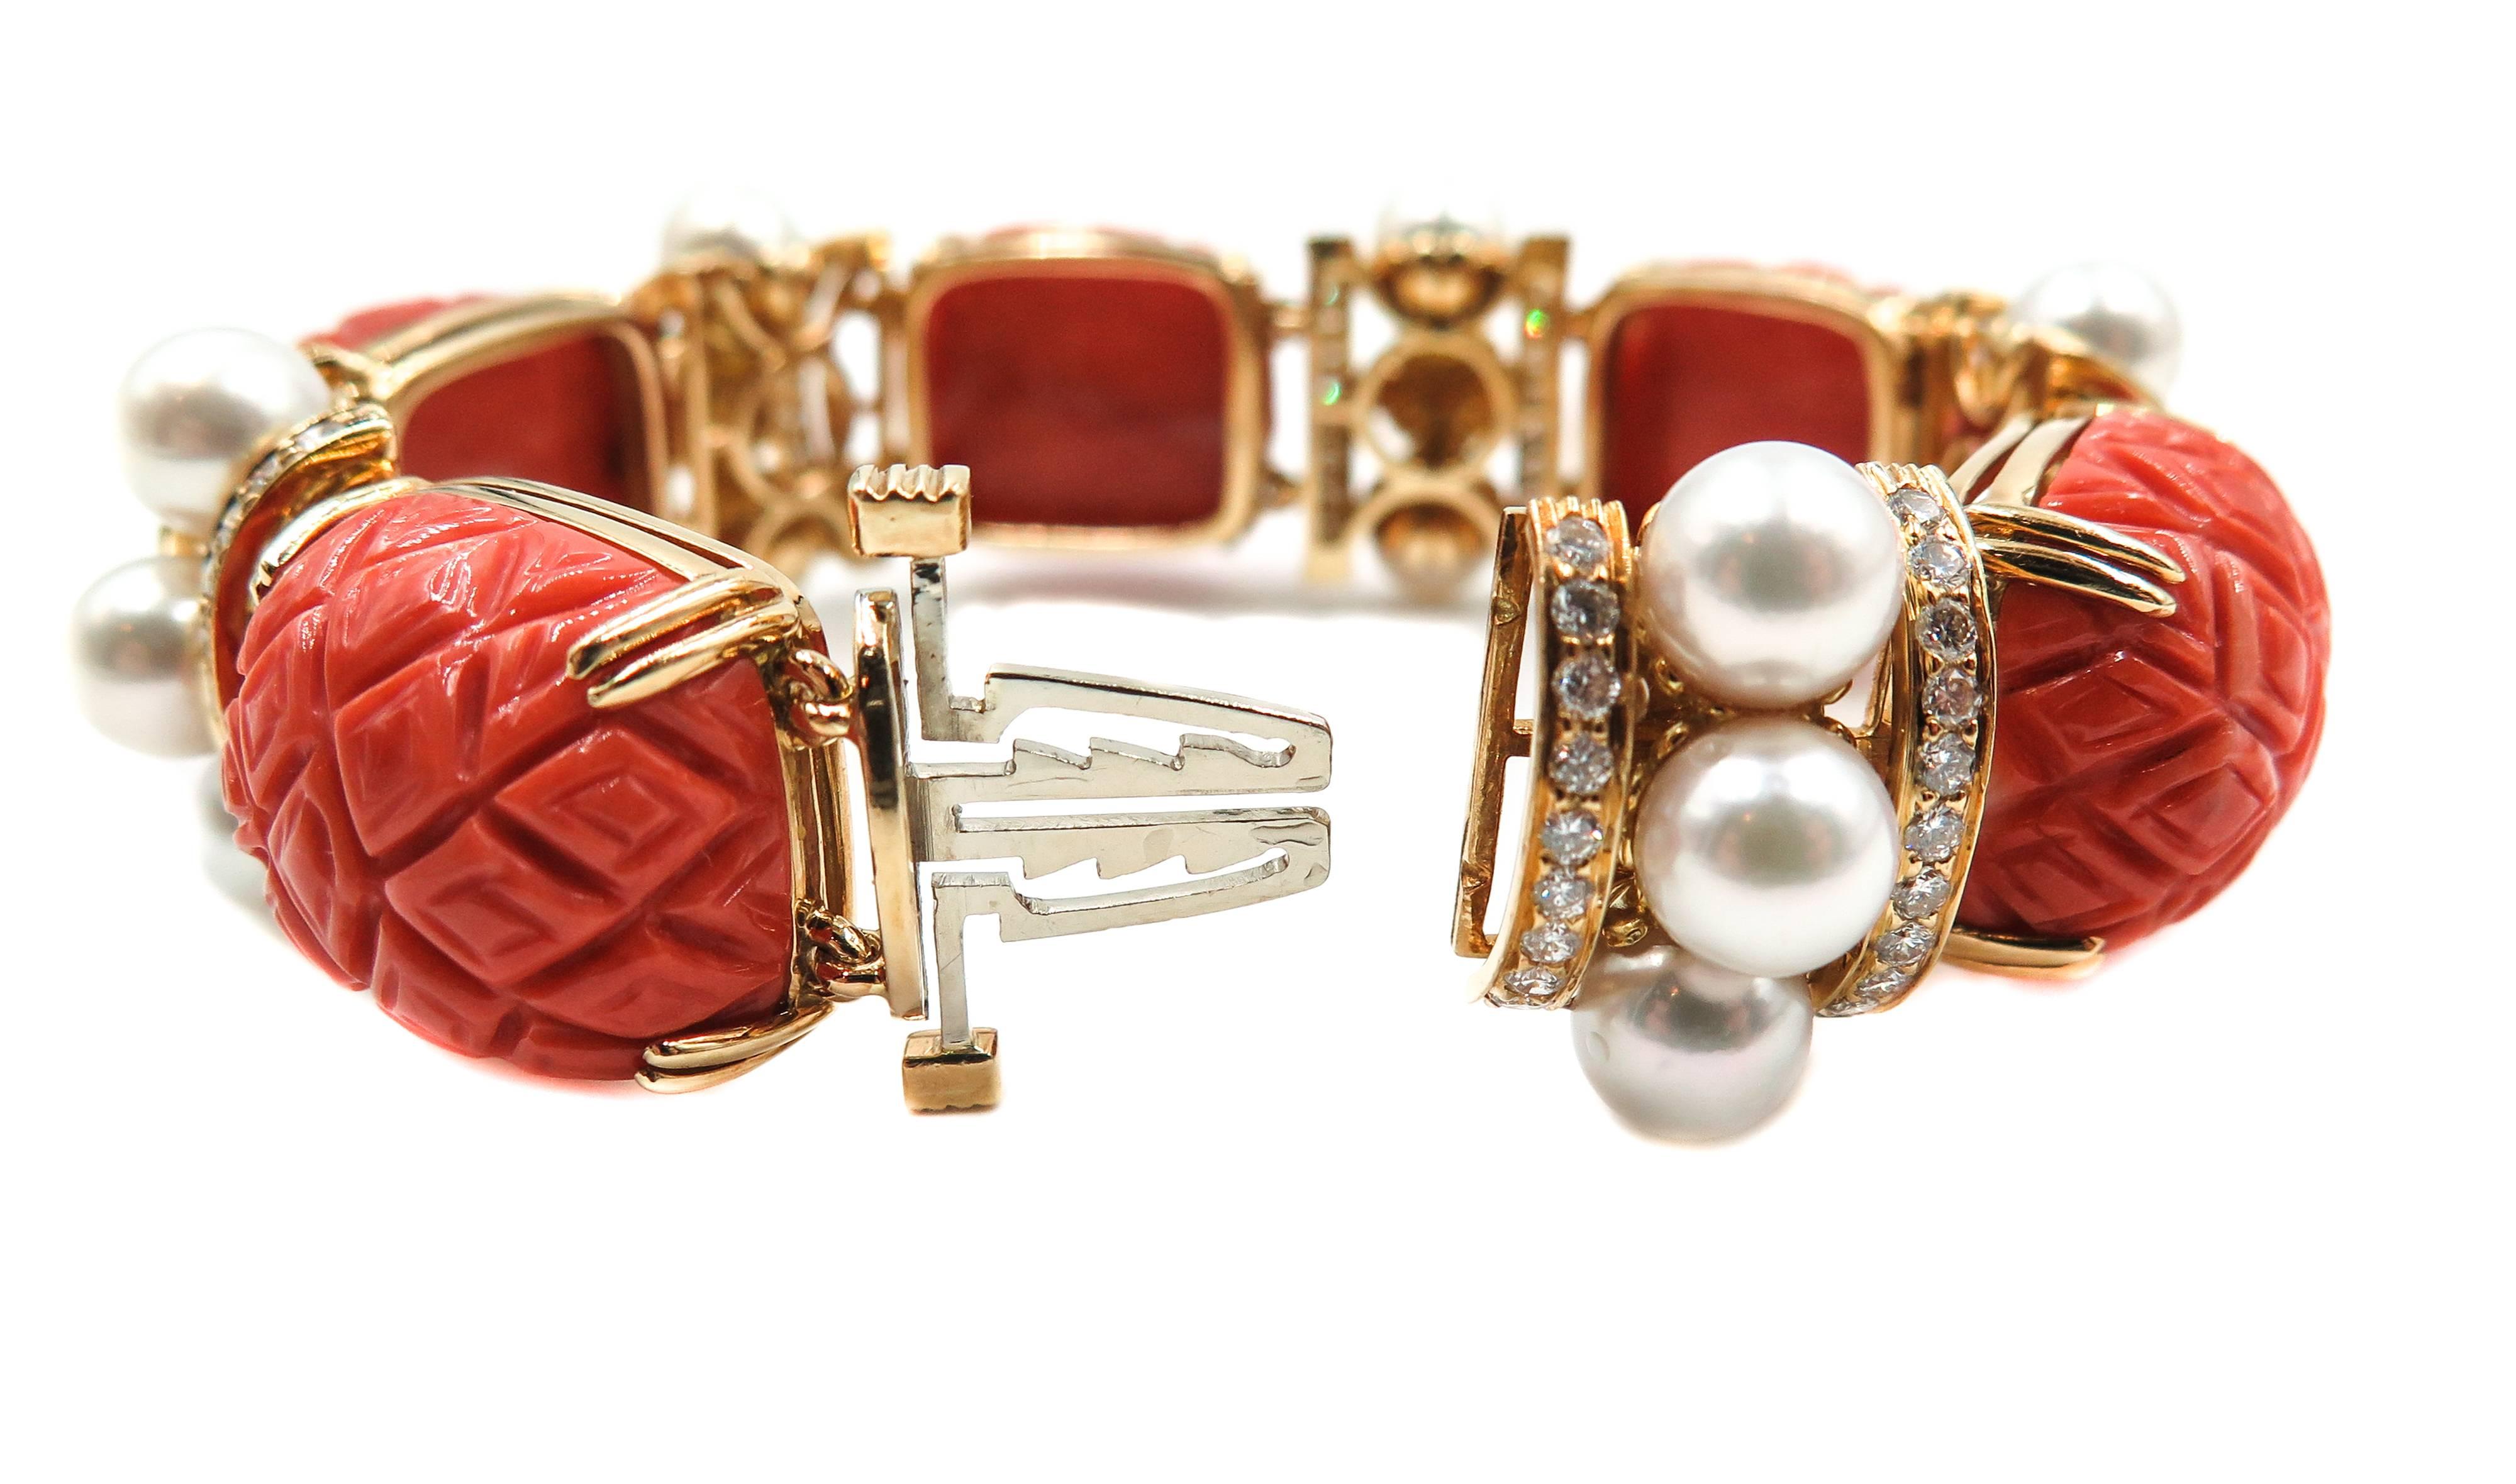 Carved Coral, Pearls and Diamond Bracelet by Seaman Schepps 2